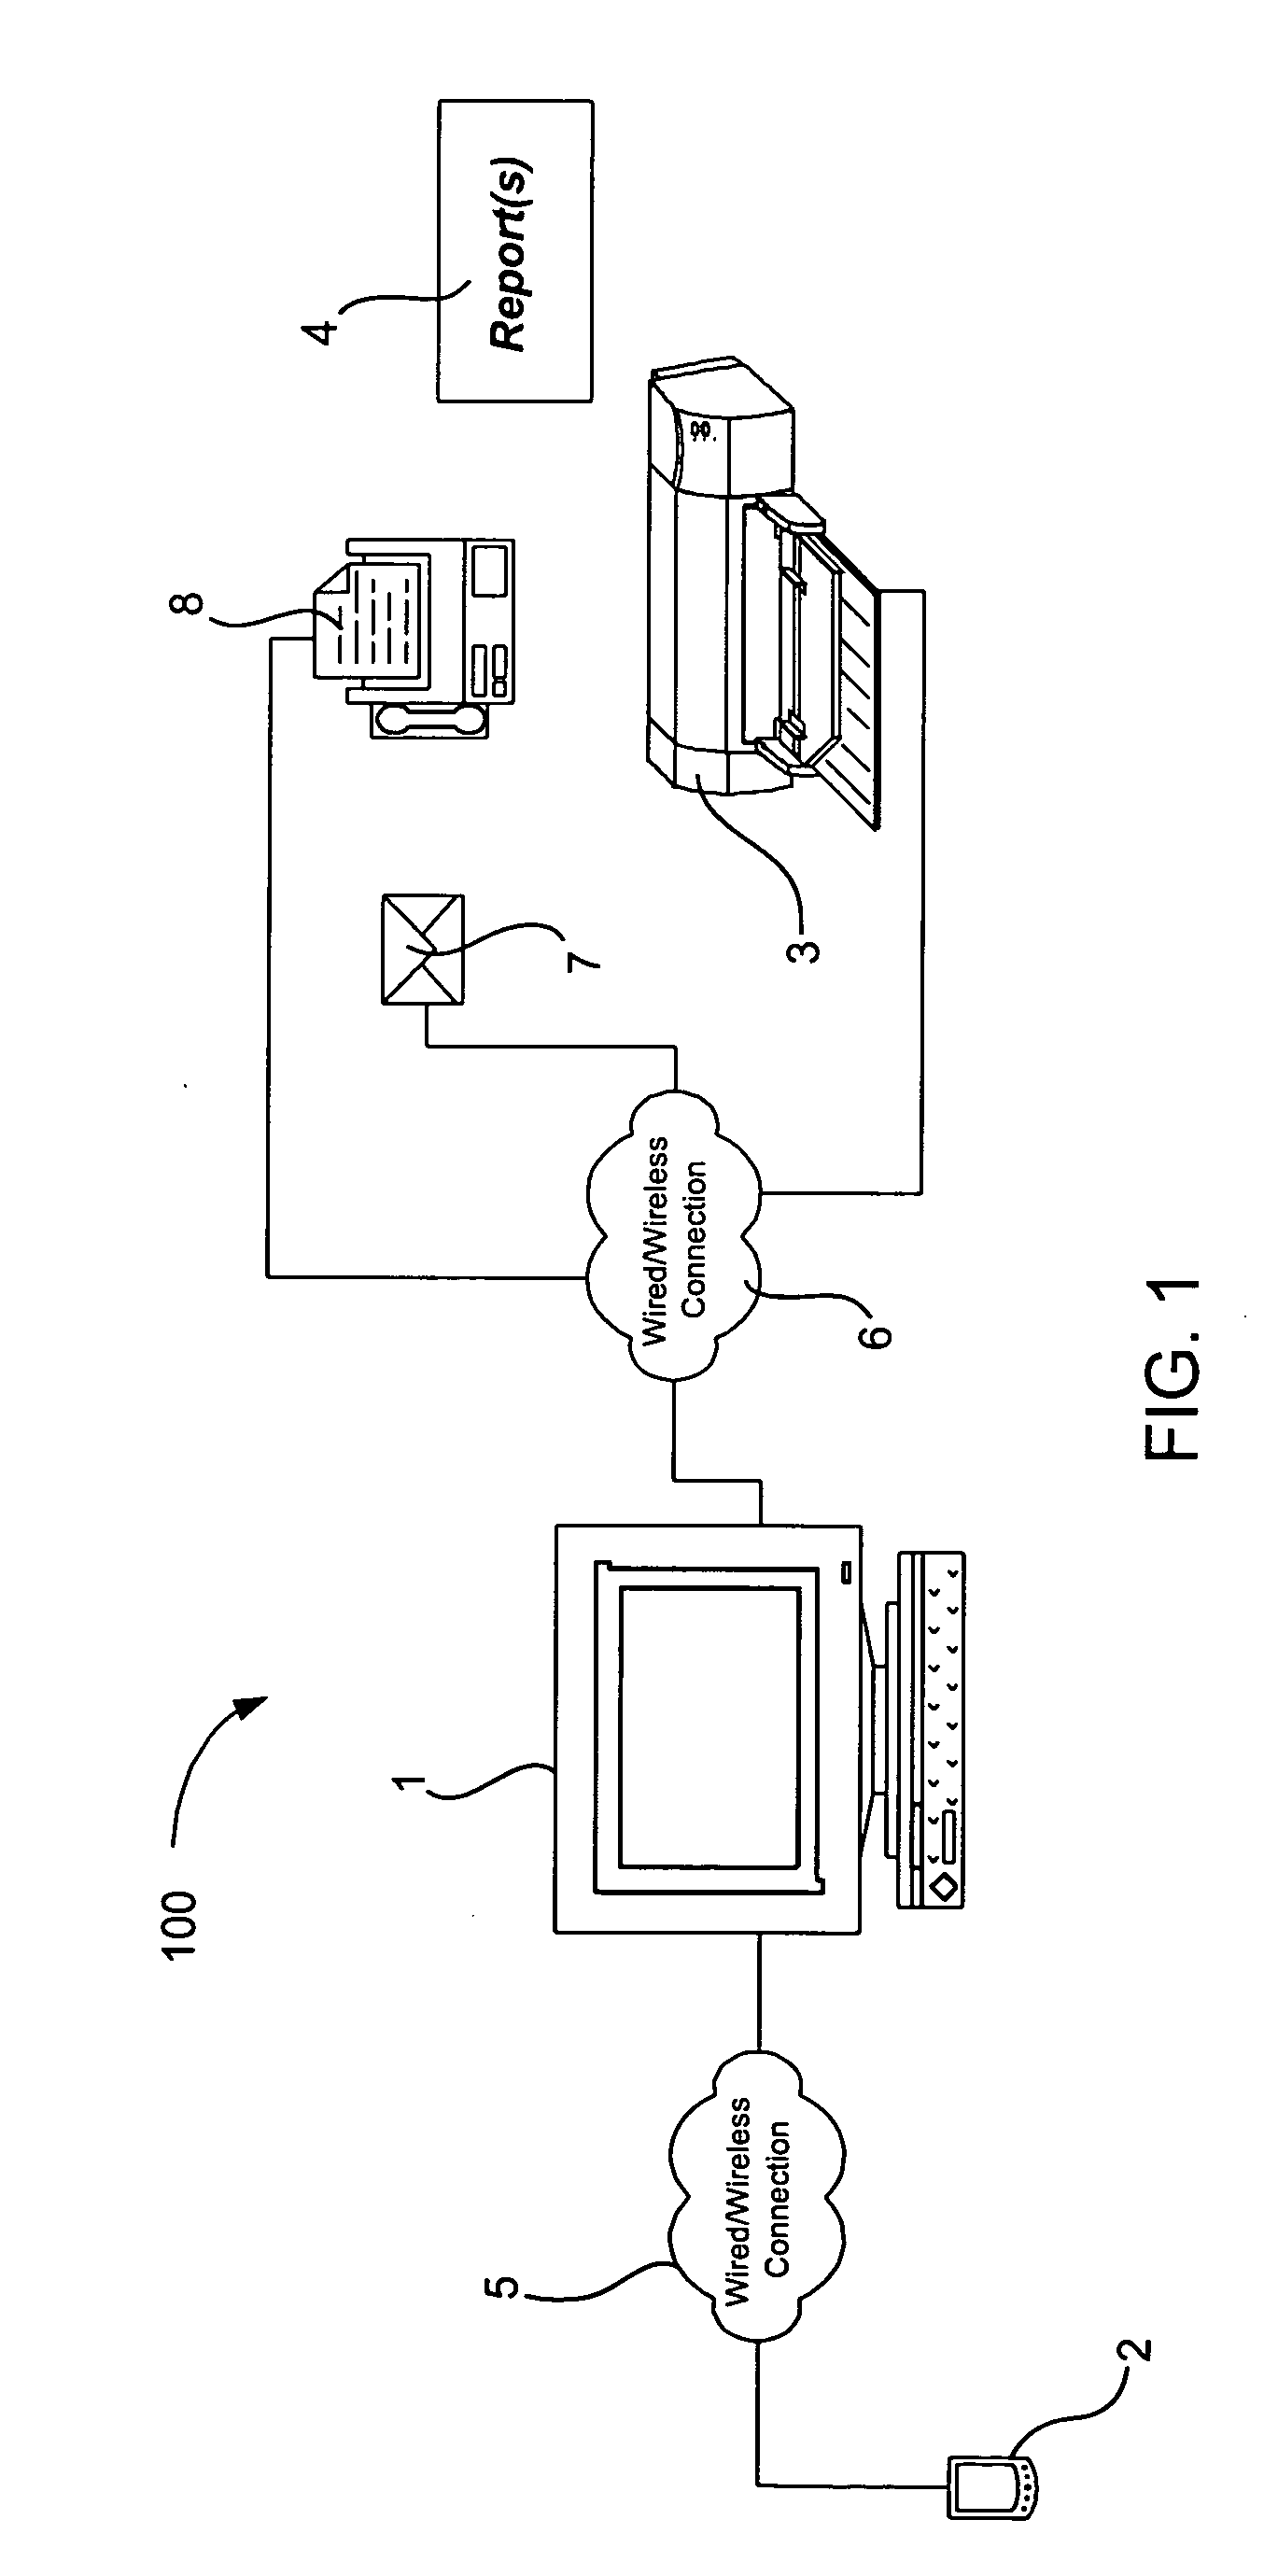 Methods and systems of automating medical device data management